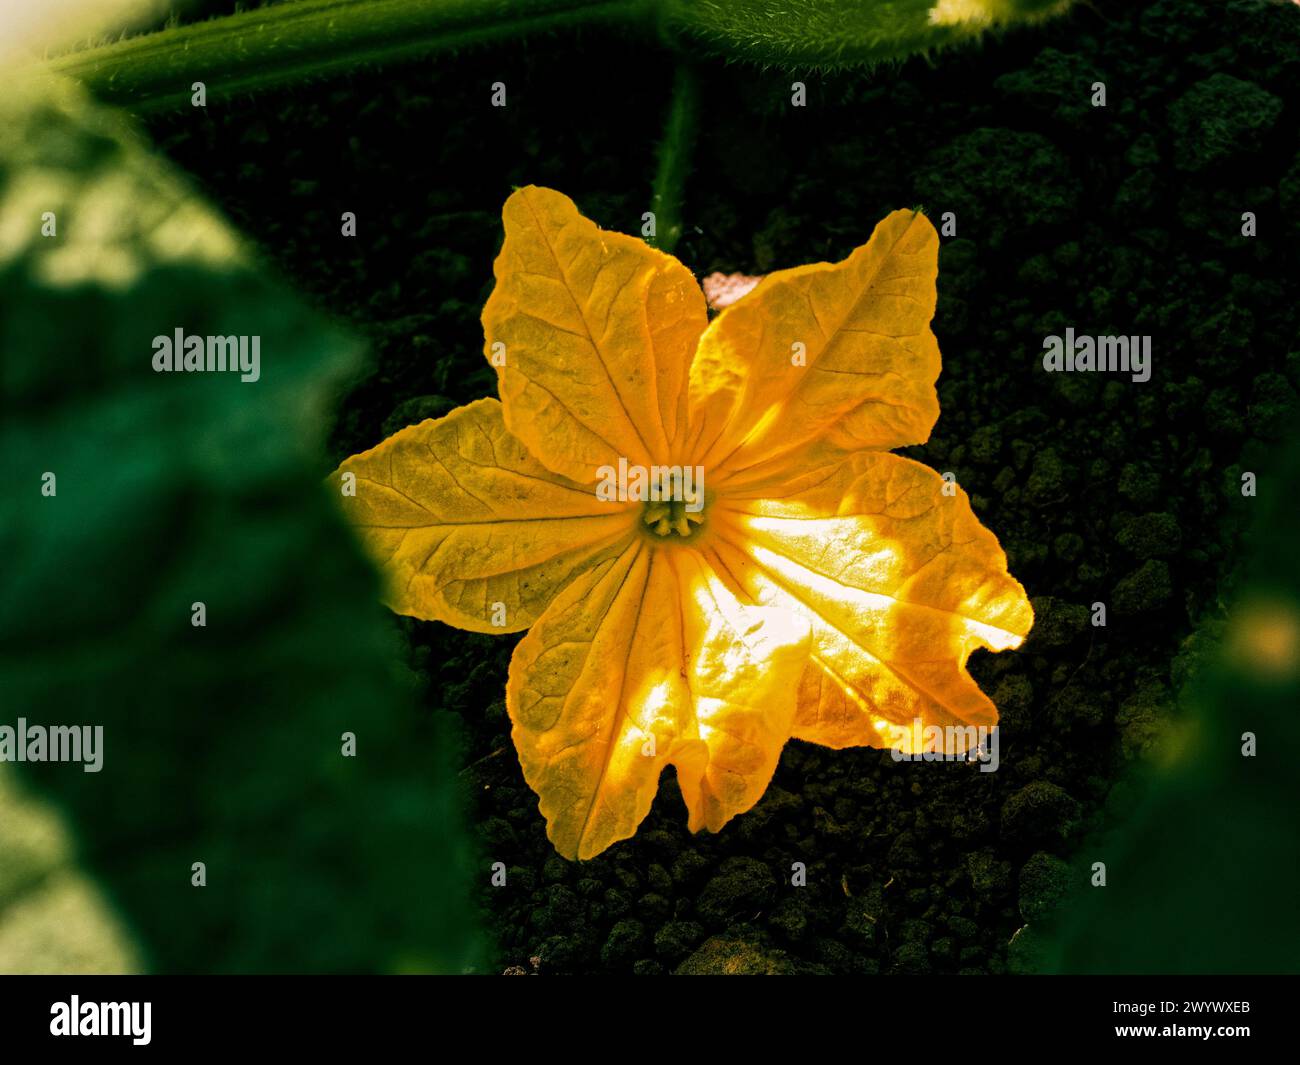 A radiant yellow petal flower is in focus, displaying detailed textures and a green stem. Stock Photo